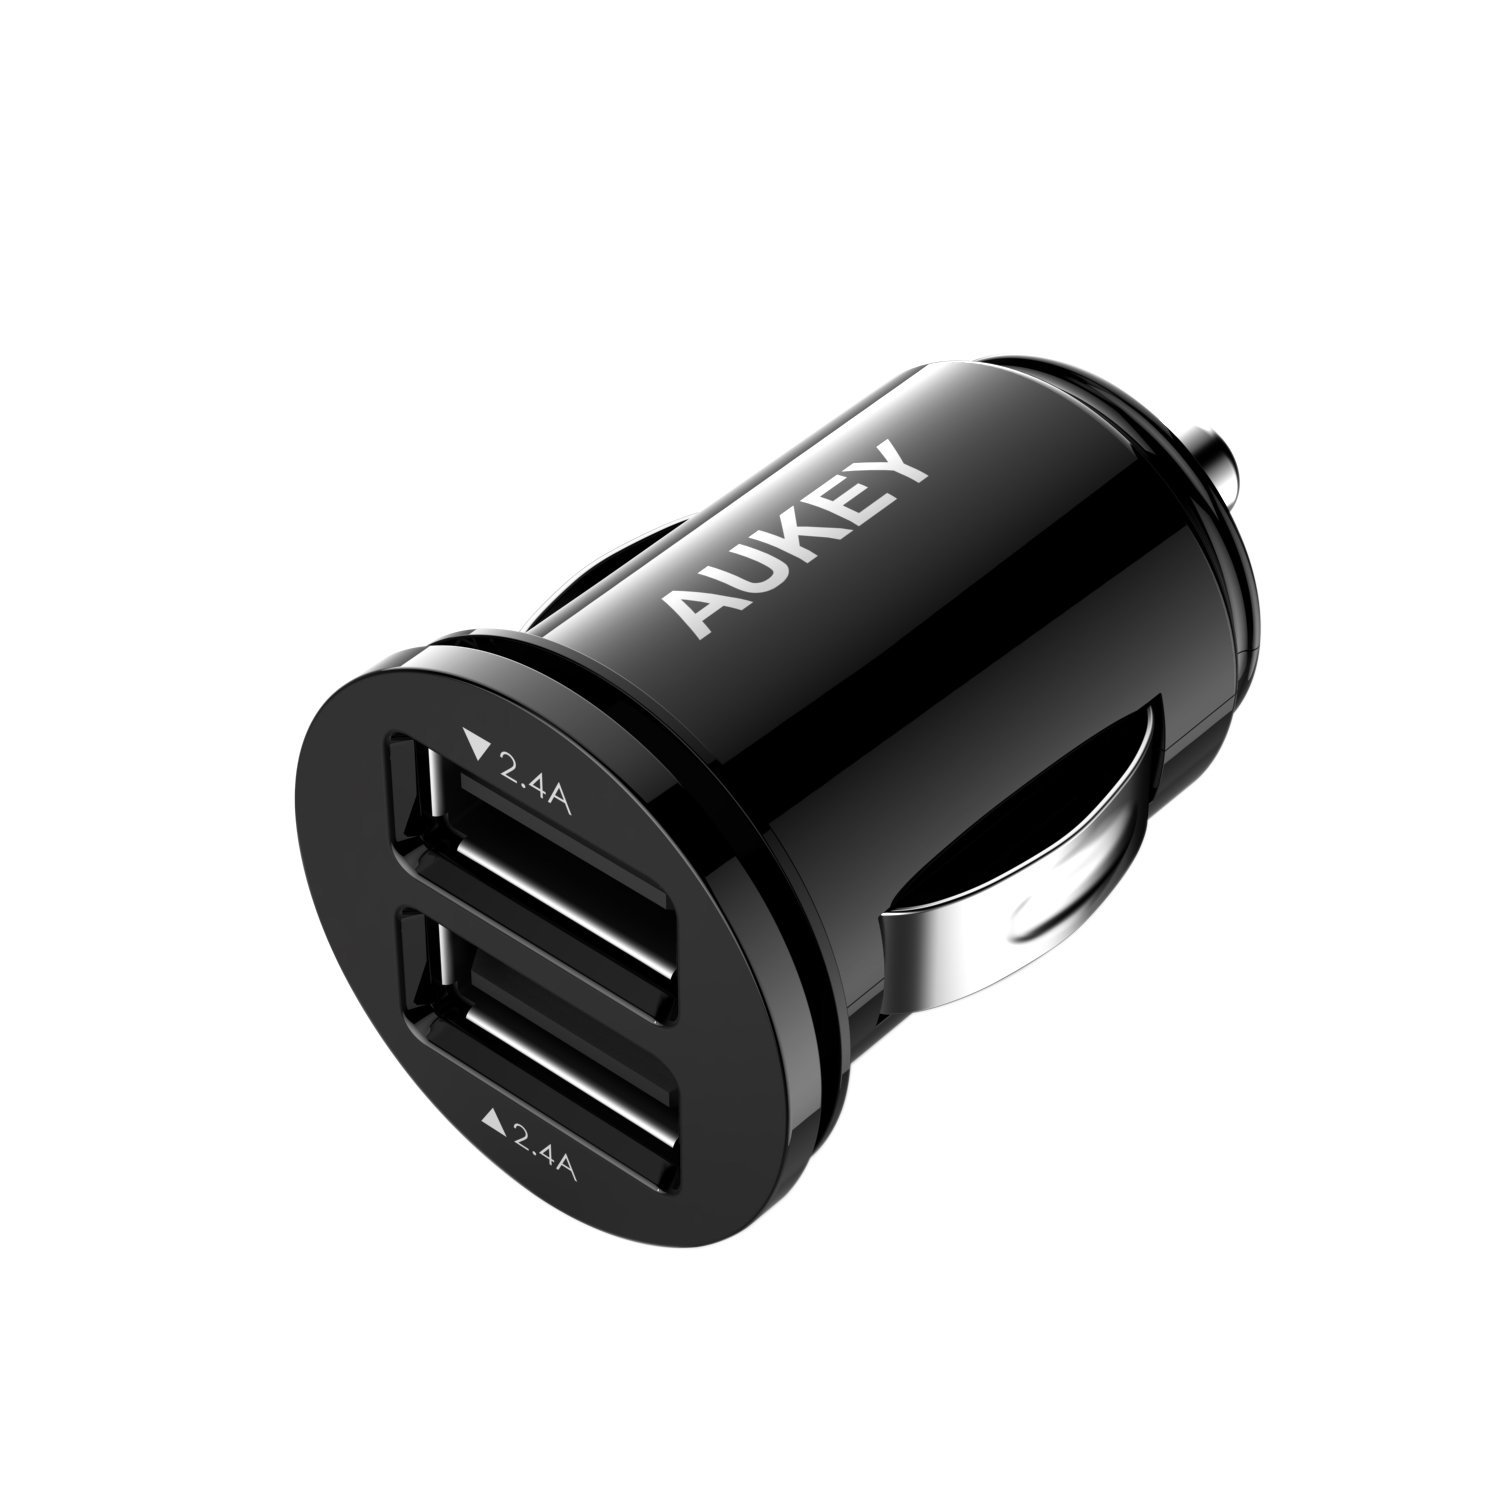 Prime Day 2017: Aukey 24W dual port car charger for $7.19